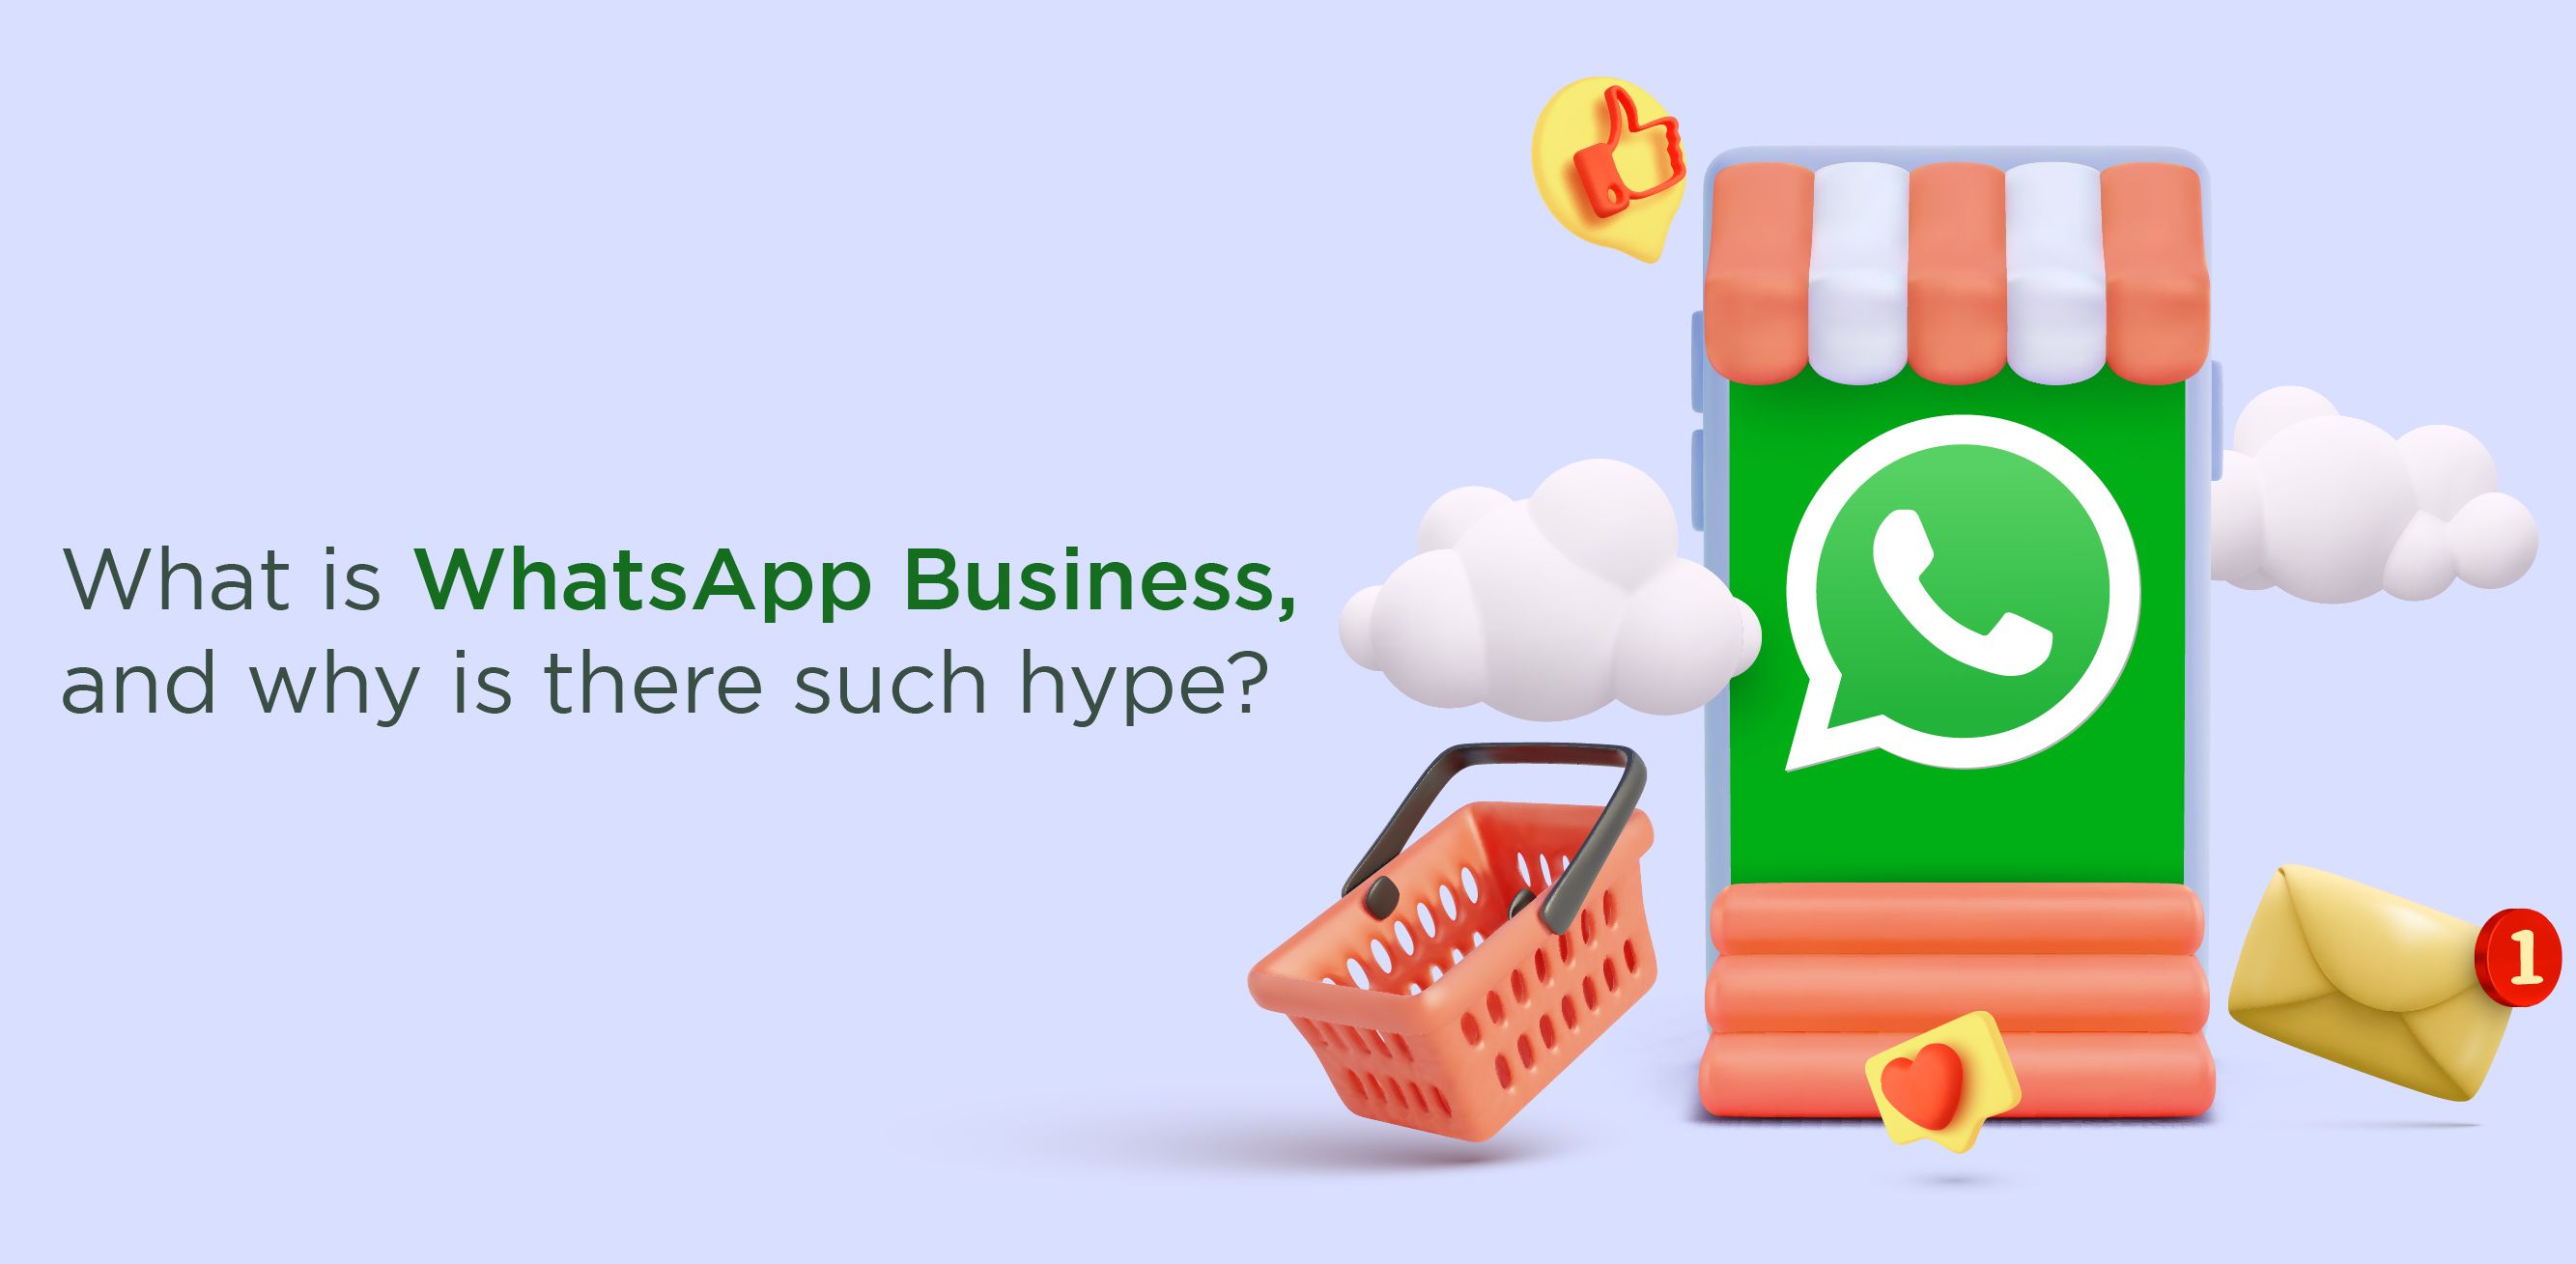 What is WhatsApp Business, and why is there such hype?